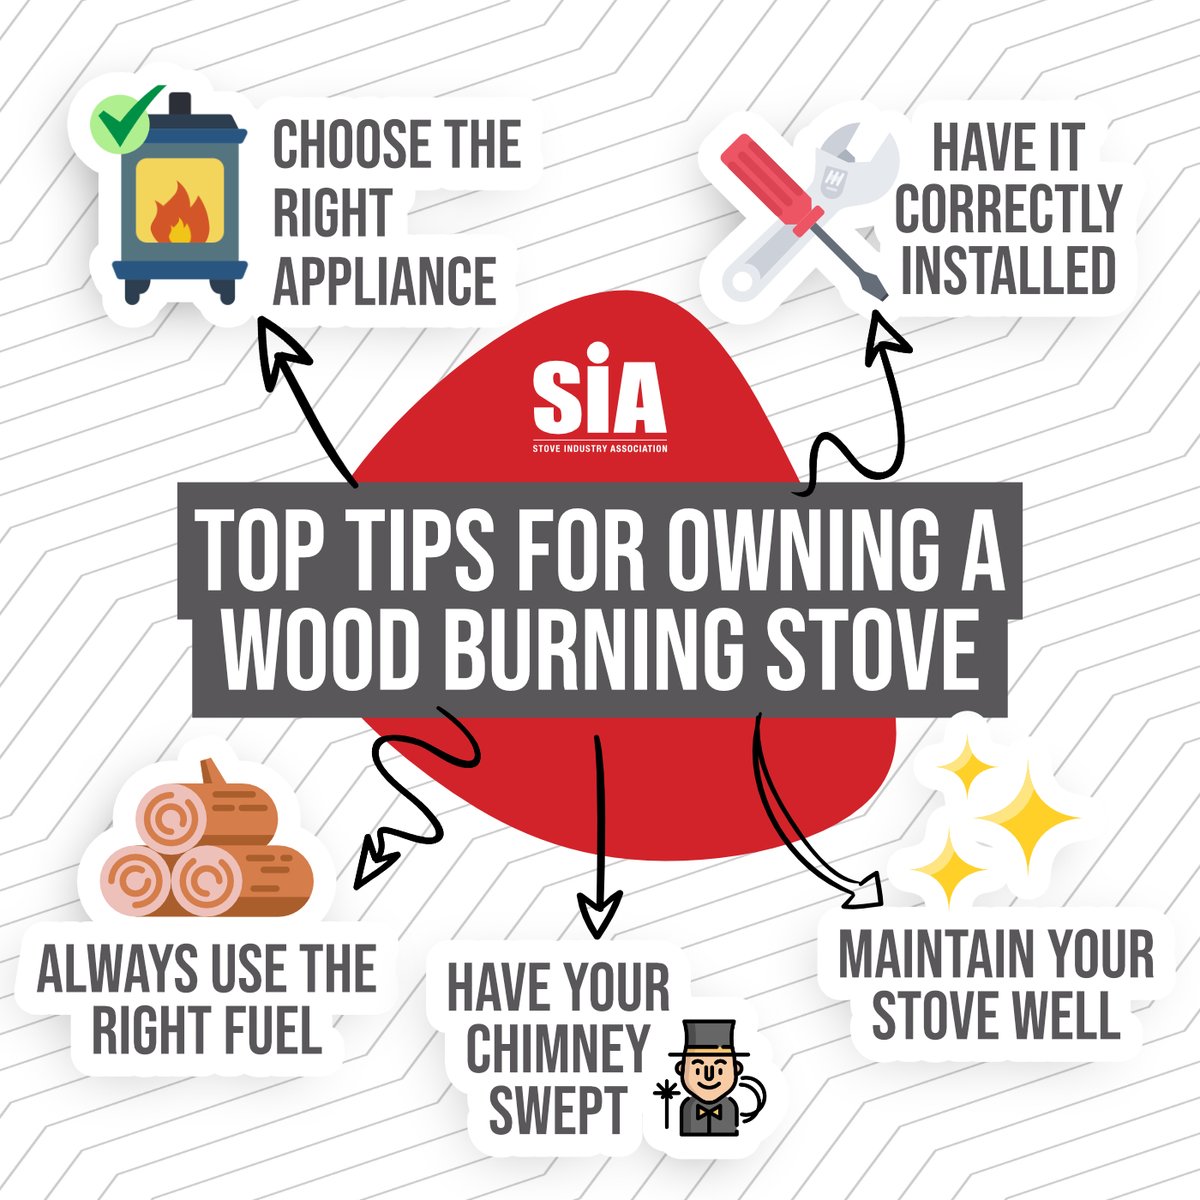 If you are the owner of a wood burning stove or are considering making a purchase, there are a few important considerations to make.⁣ ⁣ Looking for more information? Visit our website ⬇️🔥⁣ ⁣ stoveindustryassociation.org #woodburner #woodburnerstove #woodburnerstoves